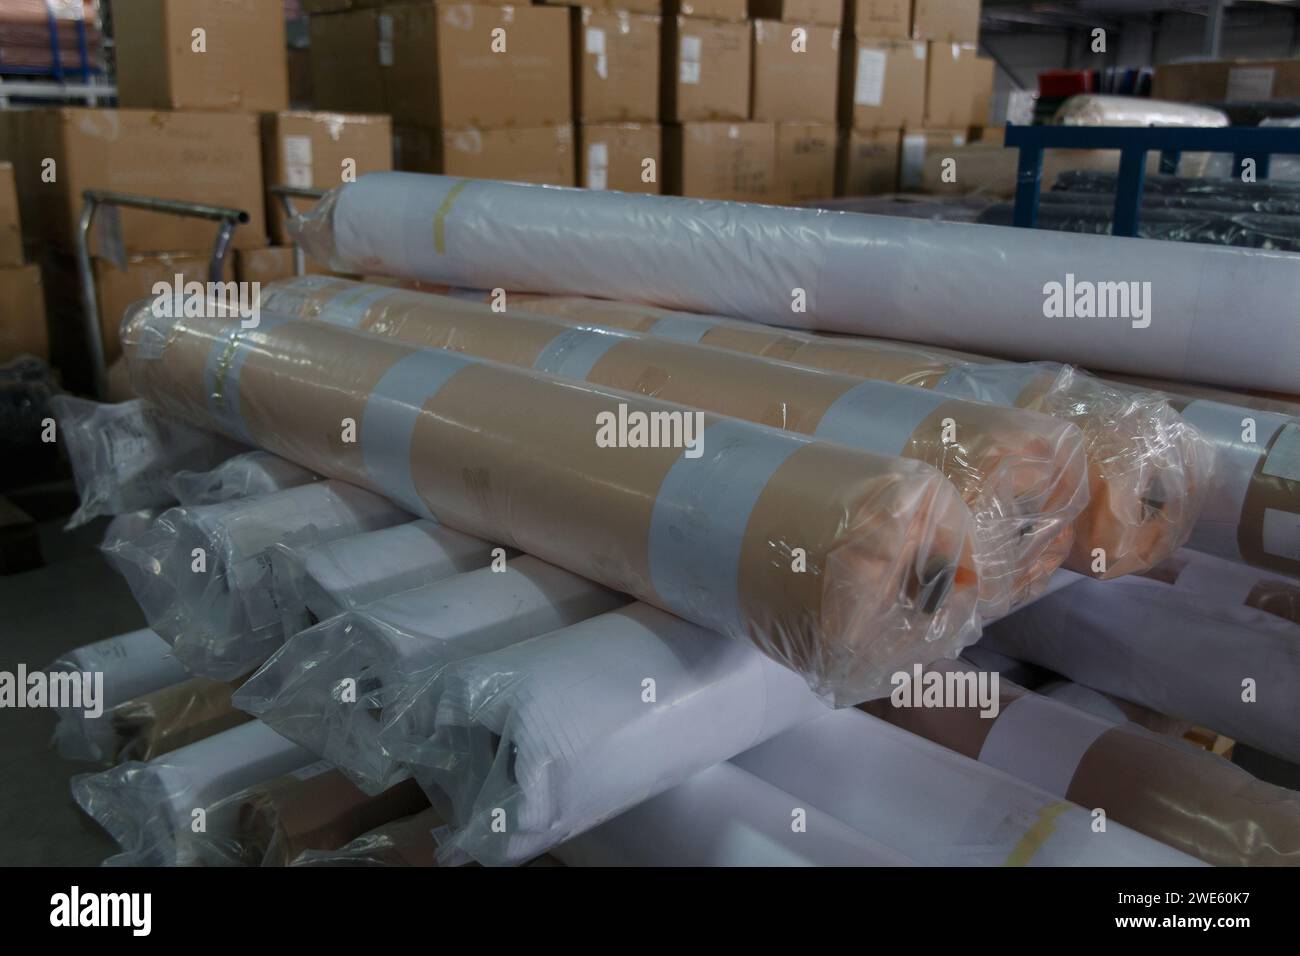 Rolls of white fabric and textiles in a factory warehouse. Stock Photo